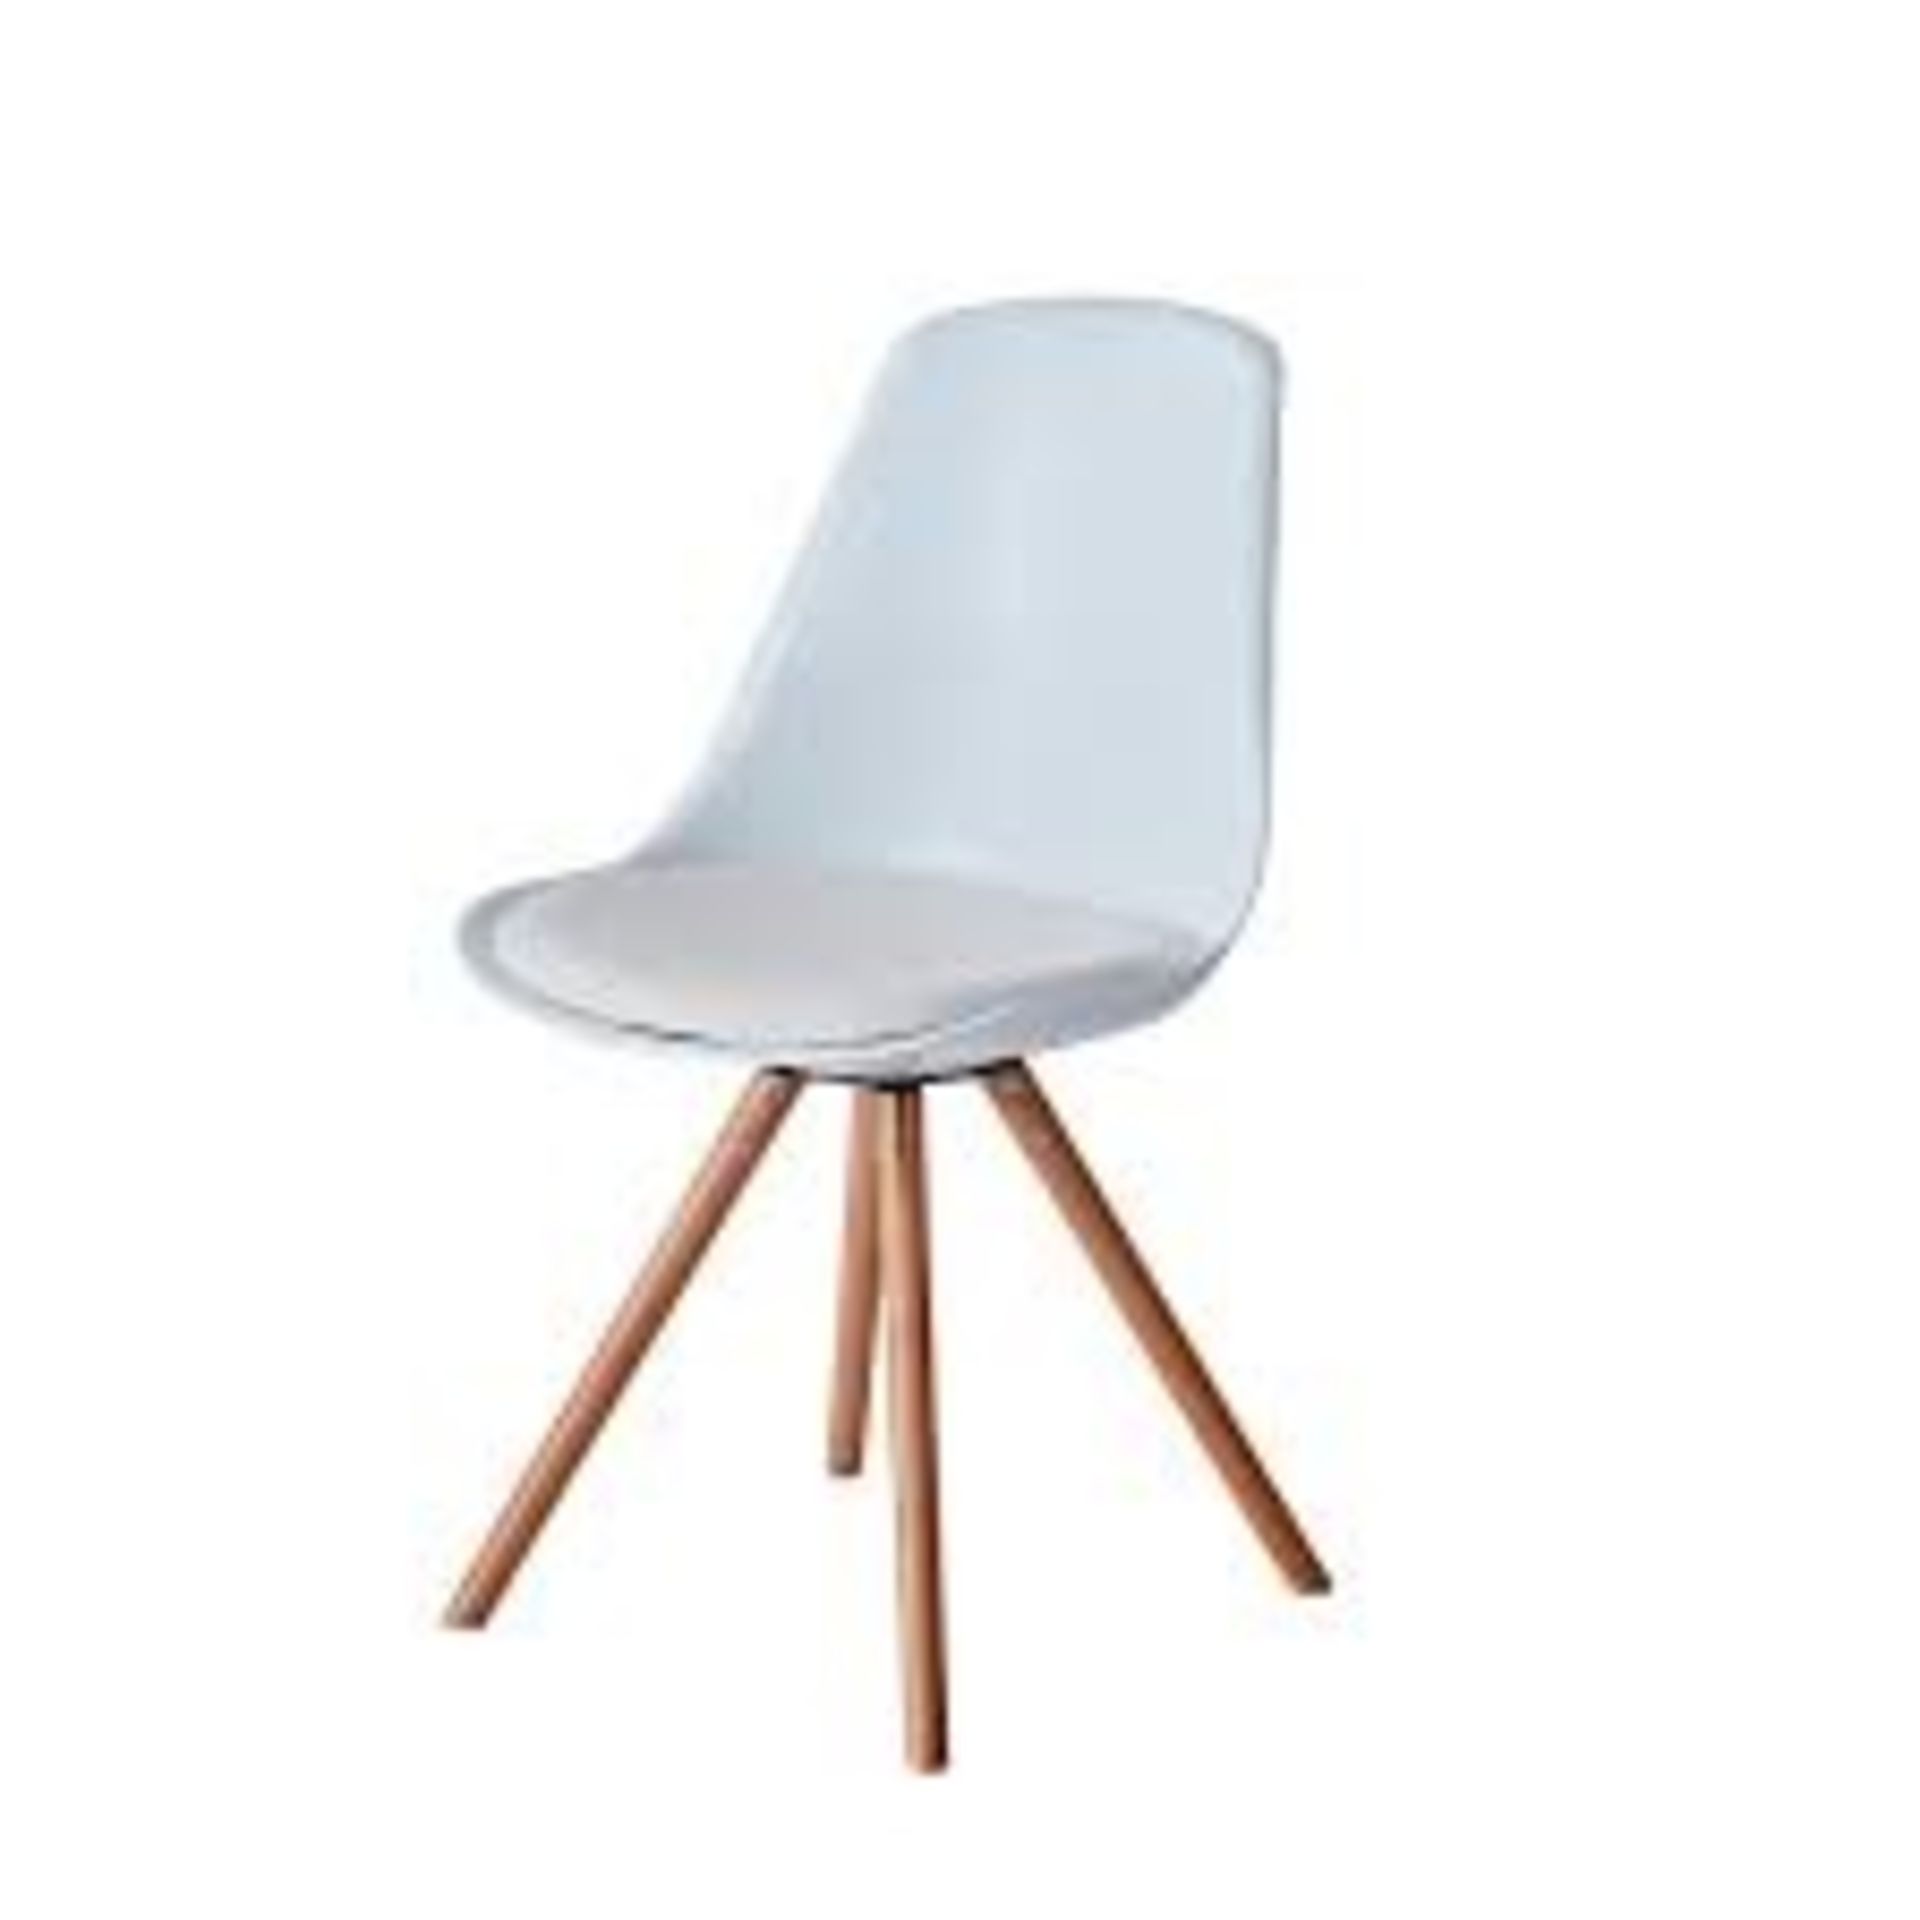 Set of 4 x Contemporary Scandinavian-style Dining Chairs in White - Deep Seated Mid Century Design - Image 3 of 4